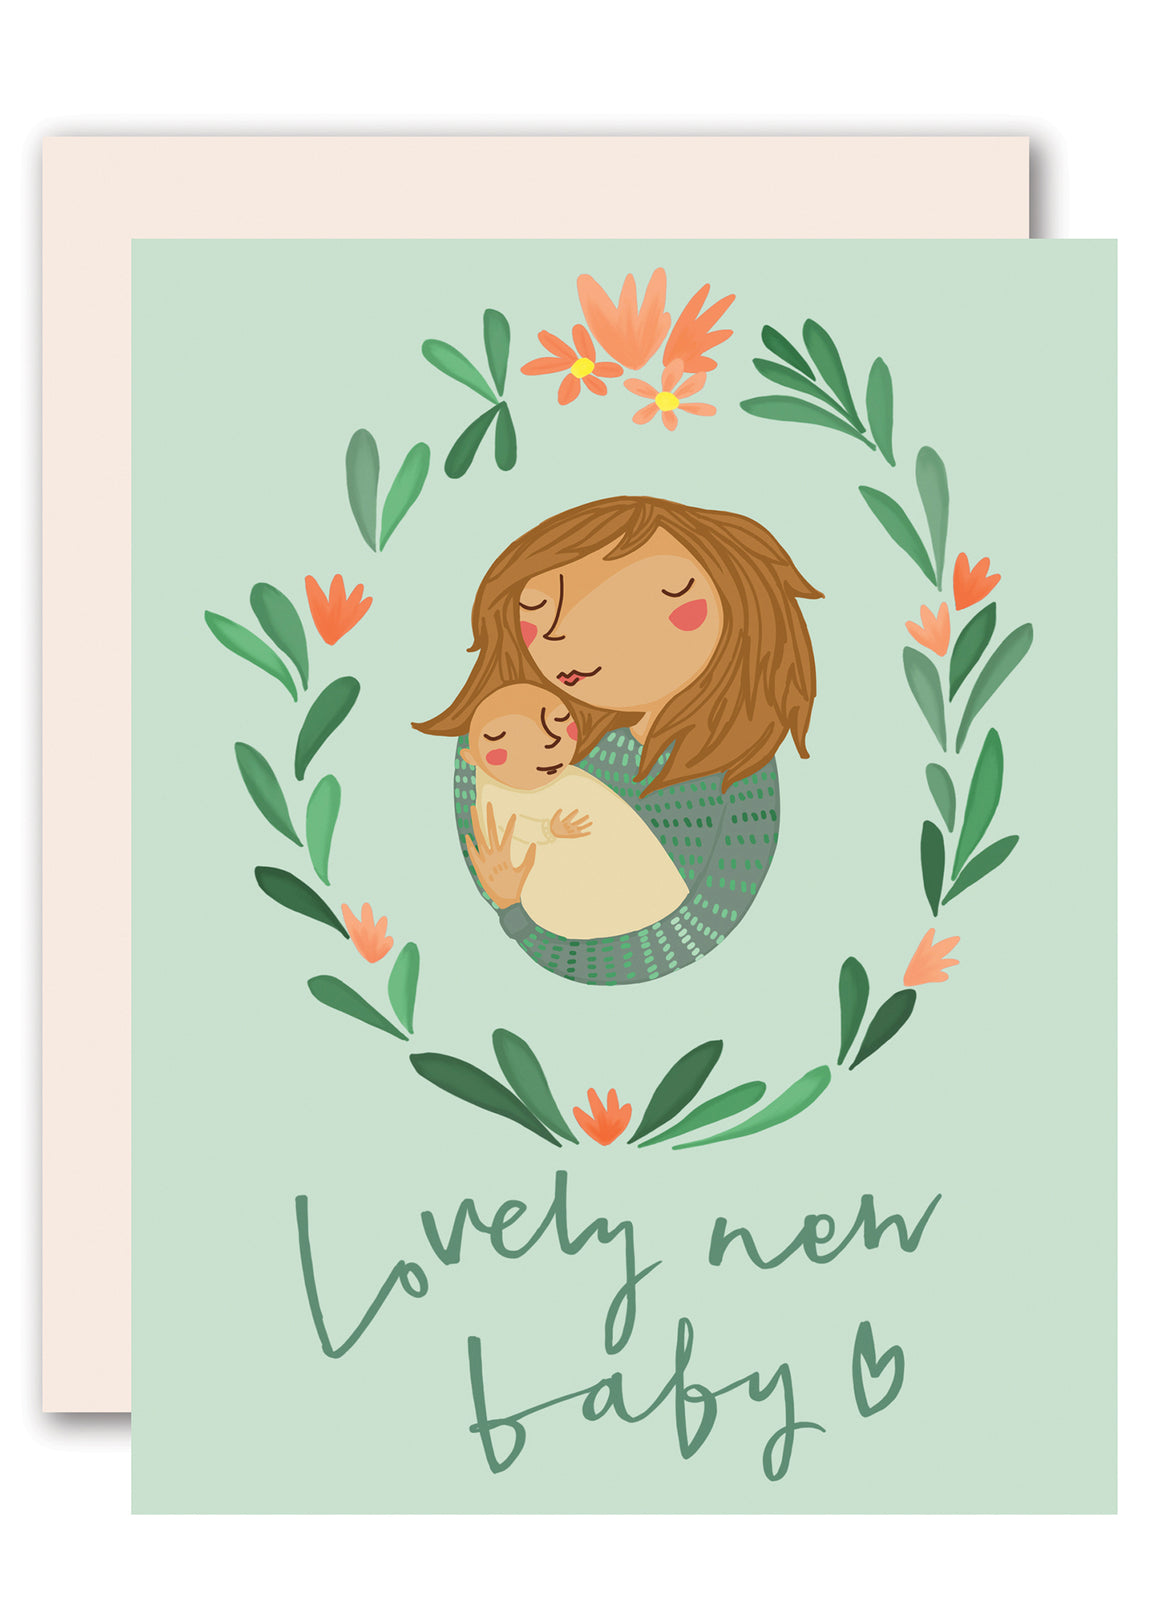 A Lovely New Baby greeting card